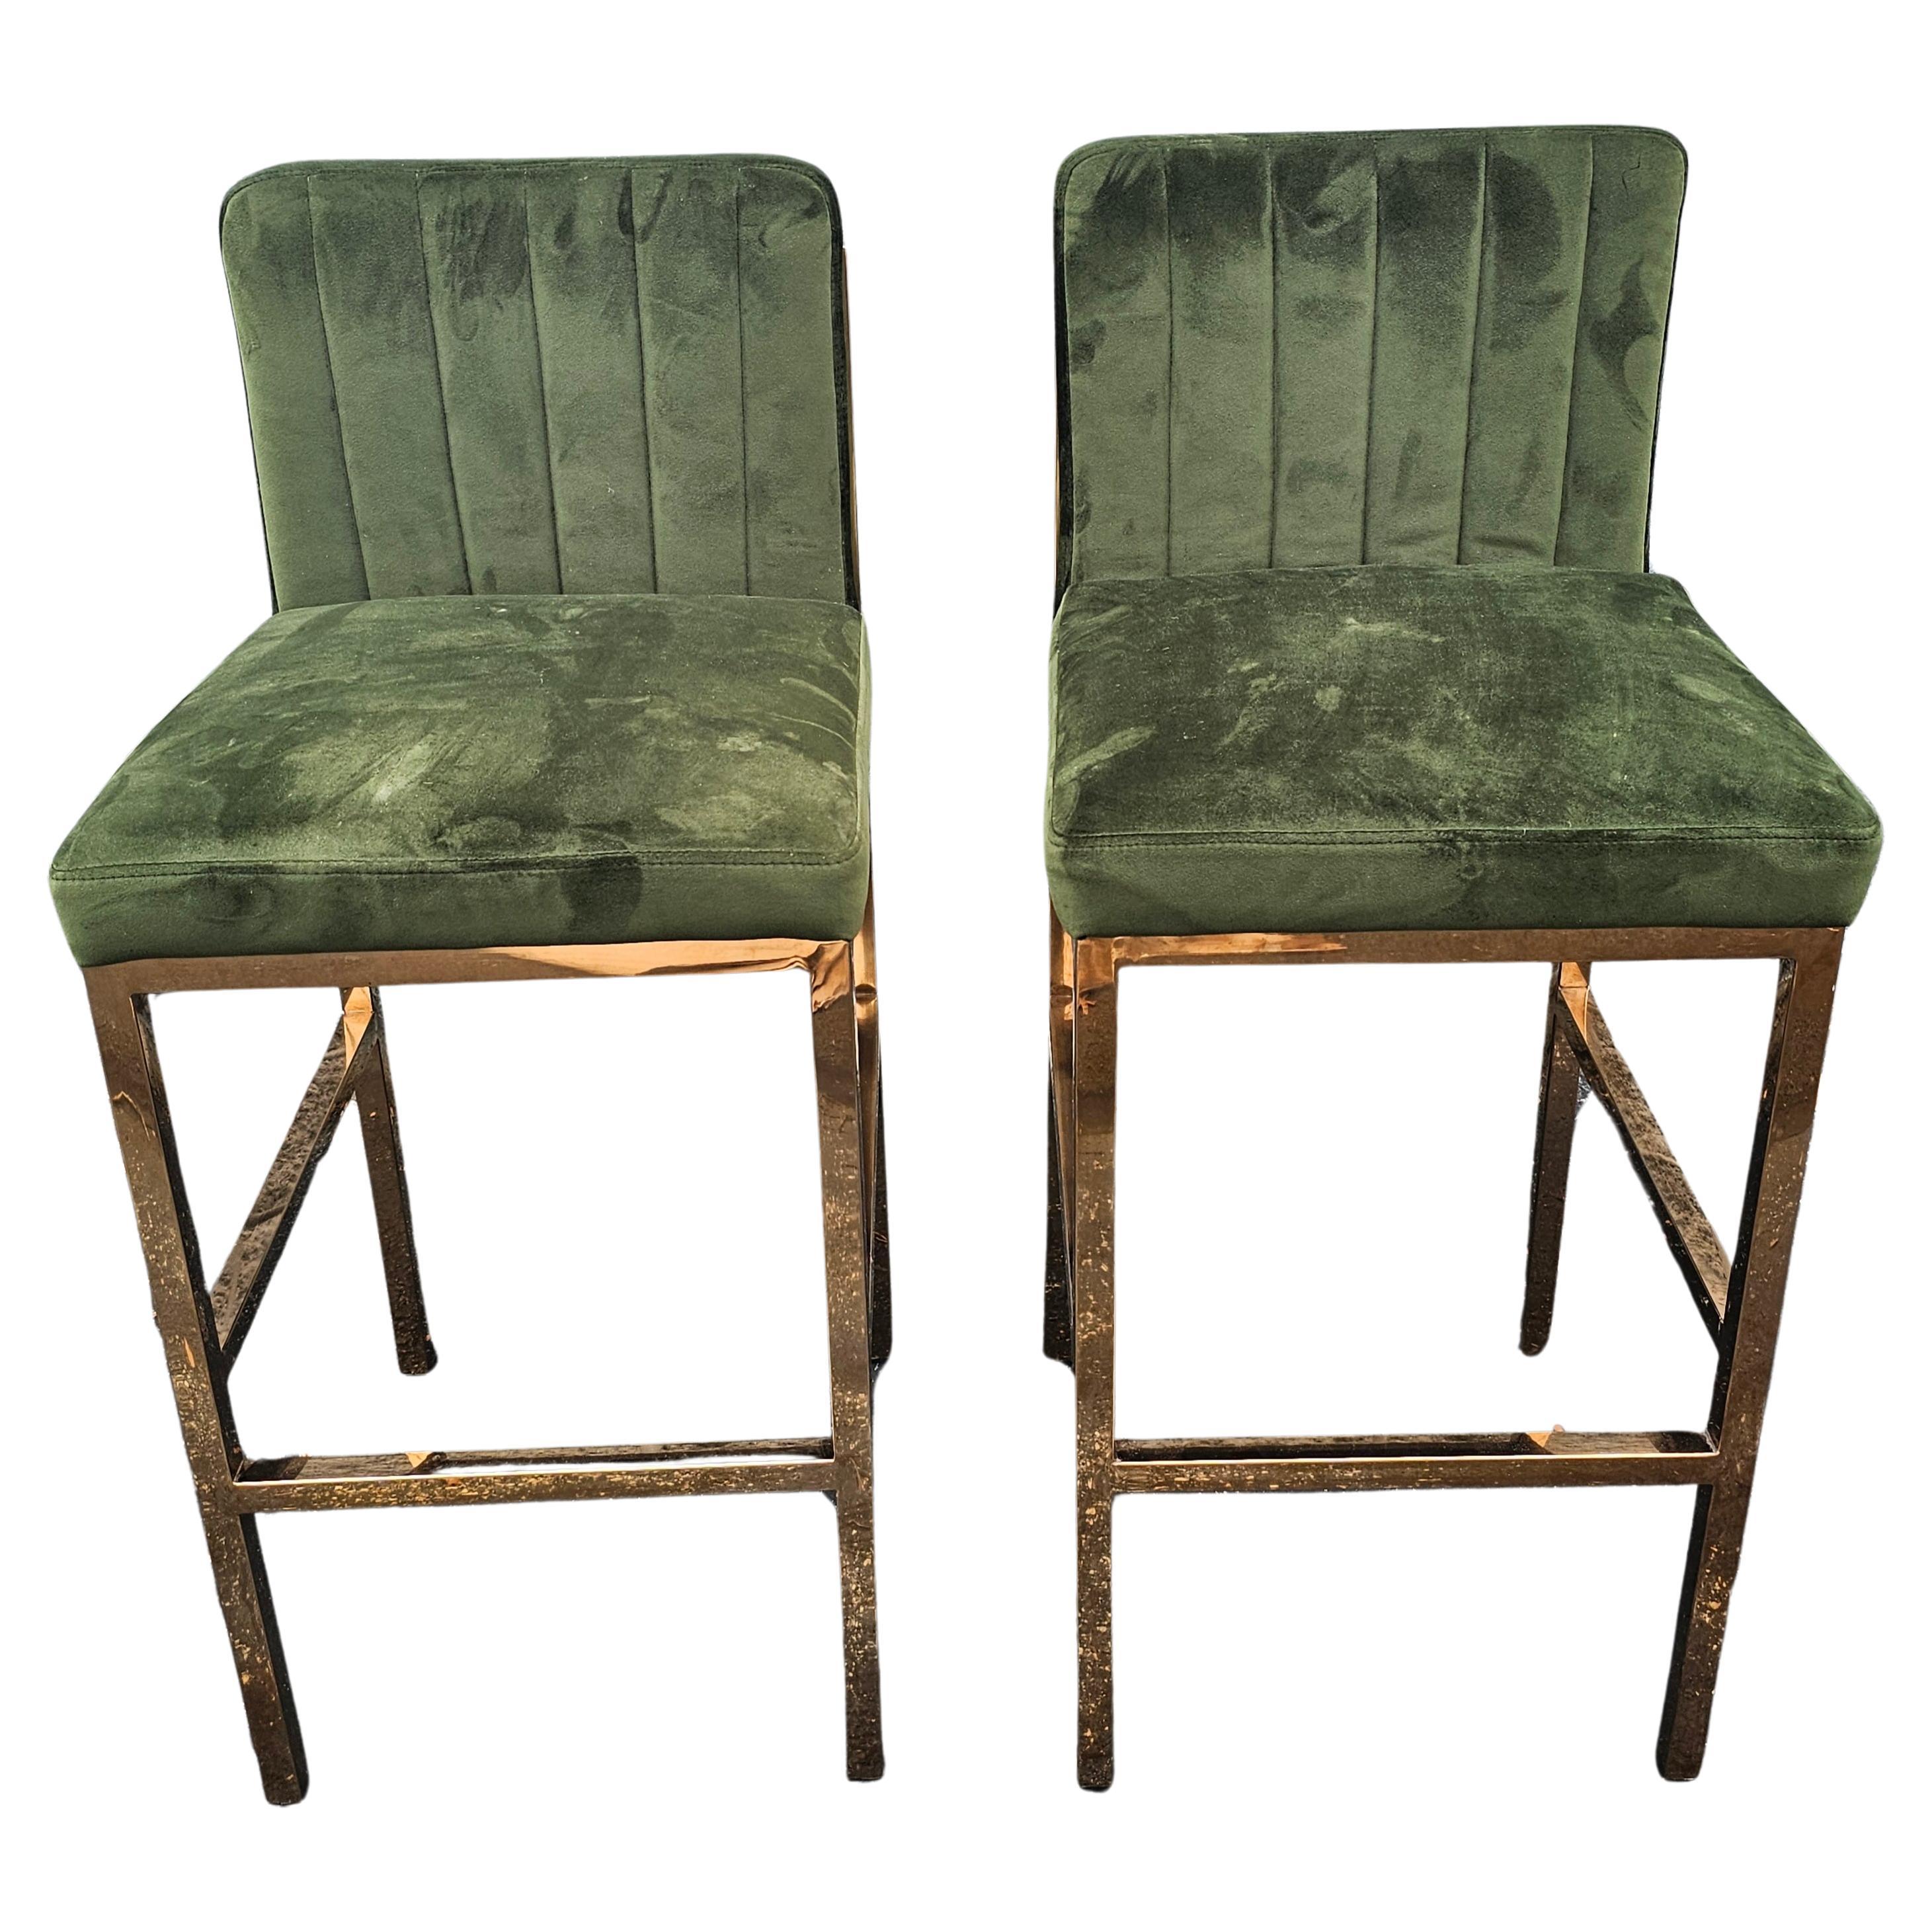 A beaitiful pair of modern polished brass frame and velvet upholstered barstools .
very comfortable. Measure 17.5